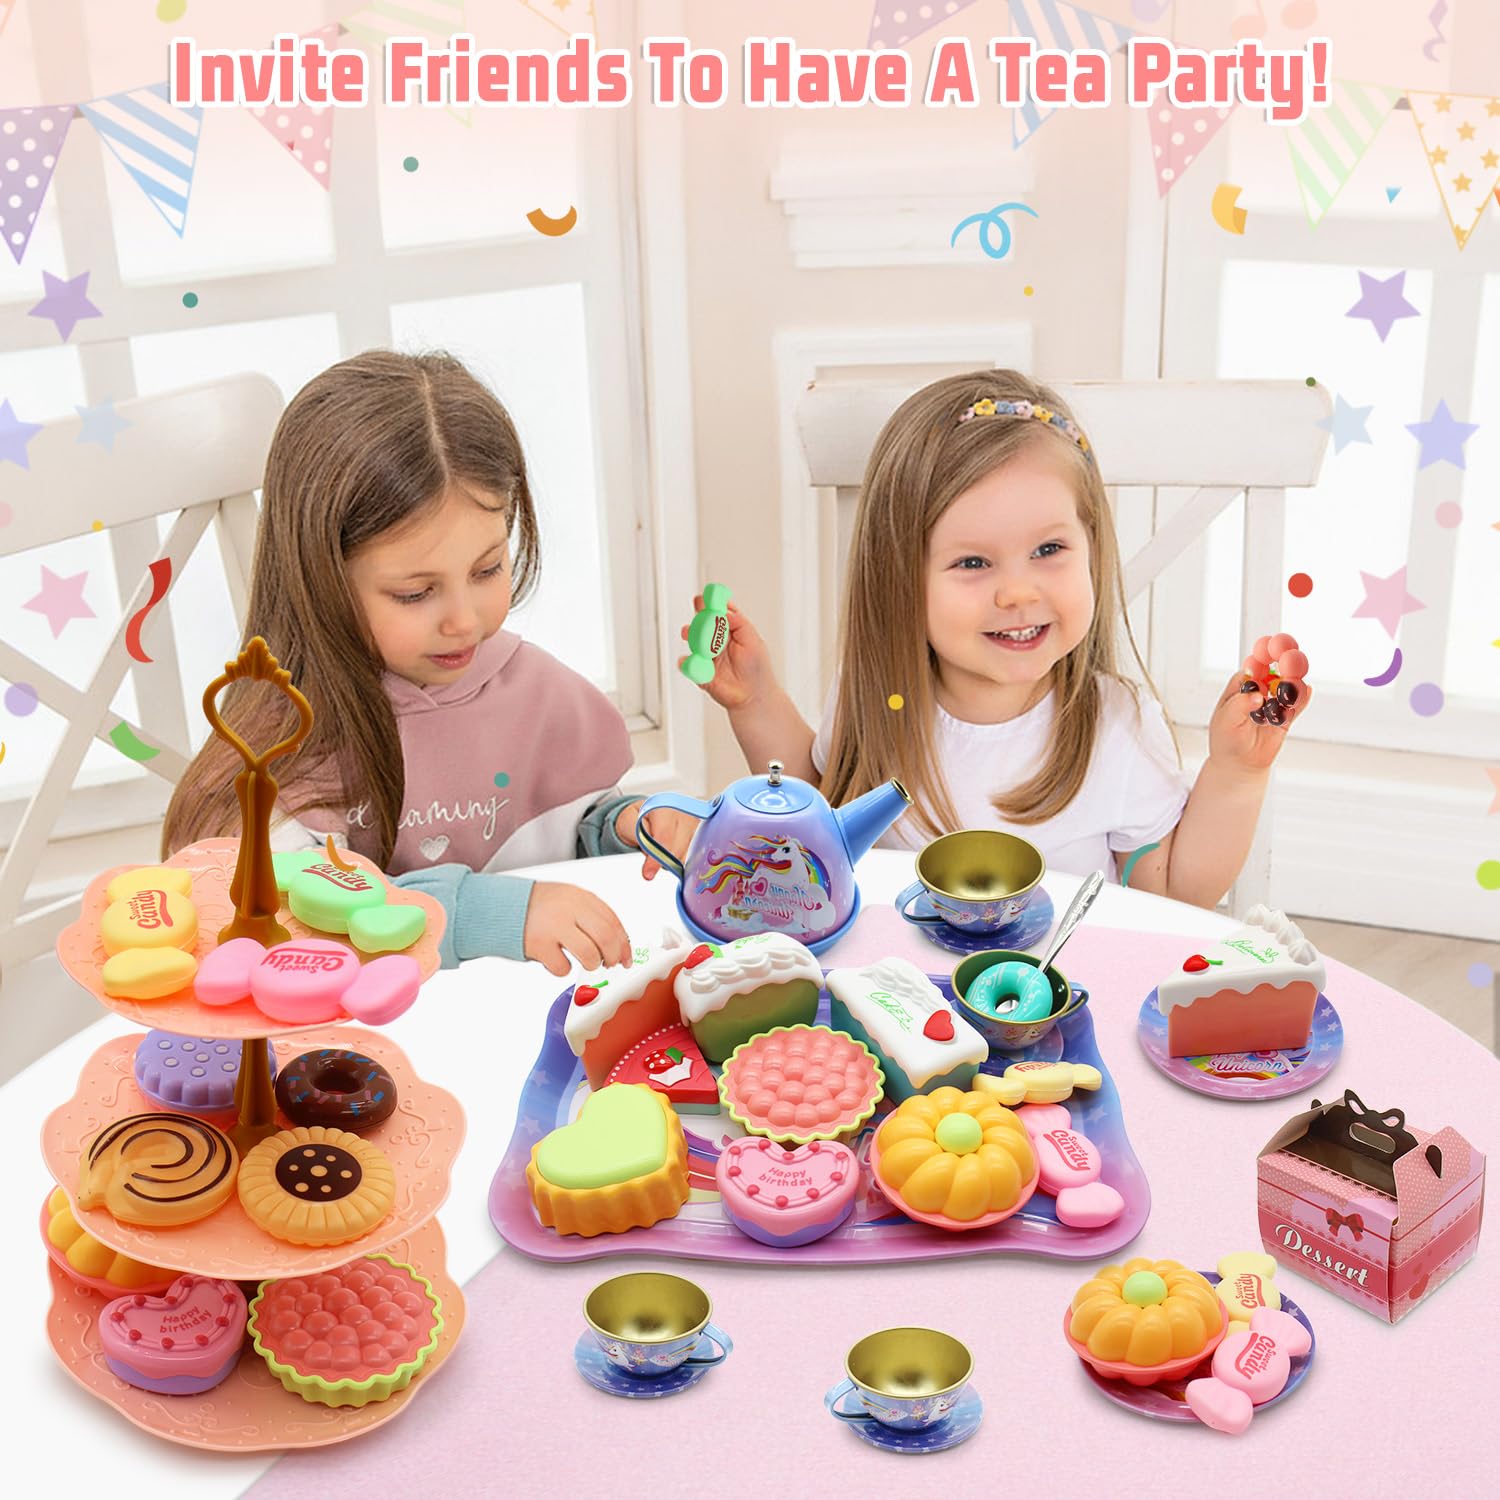 Dollox Kids Tea Party Playsets for Little Girls, Pretend Tin Teapot Set Princess Tea Time Toys Playset with Teapot, Cups, Plates and Carrying Case Birthday Gifts Ideas for Age 3 4 5 6 Years Old Girls